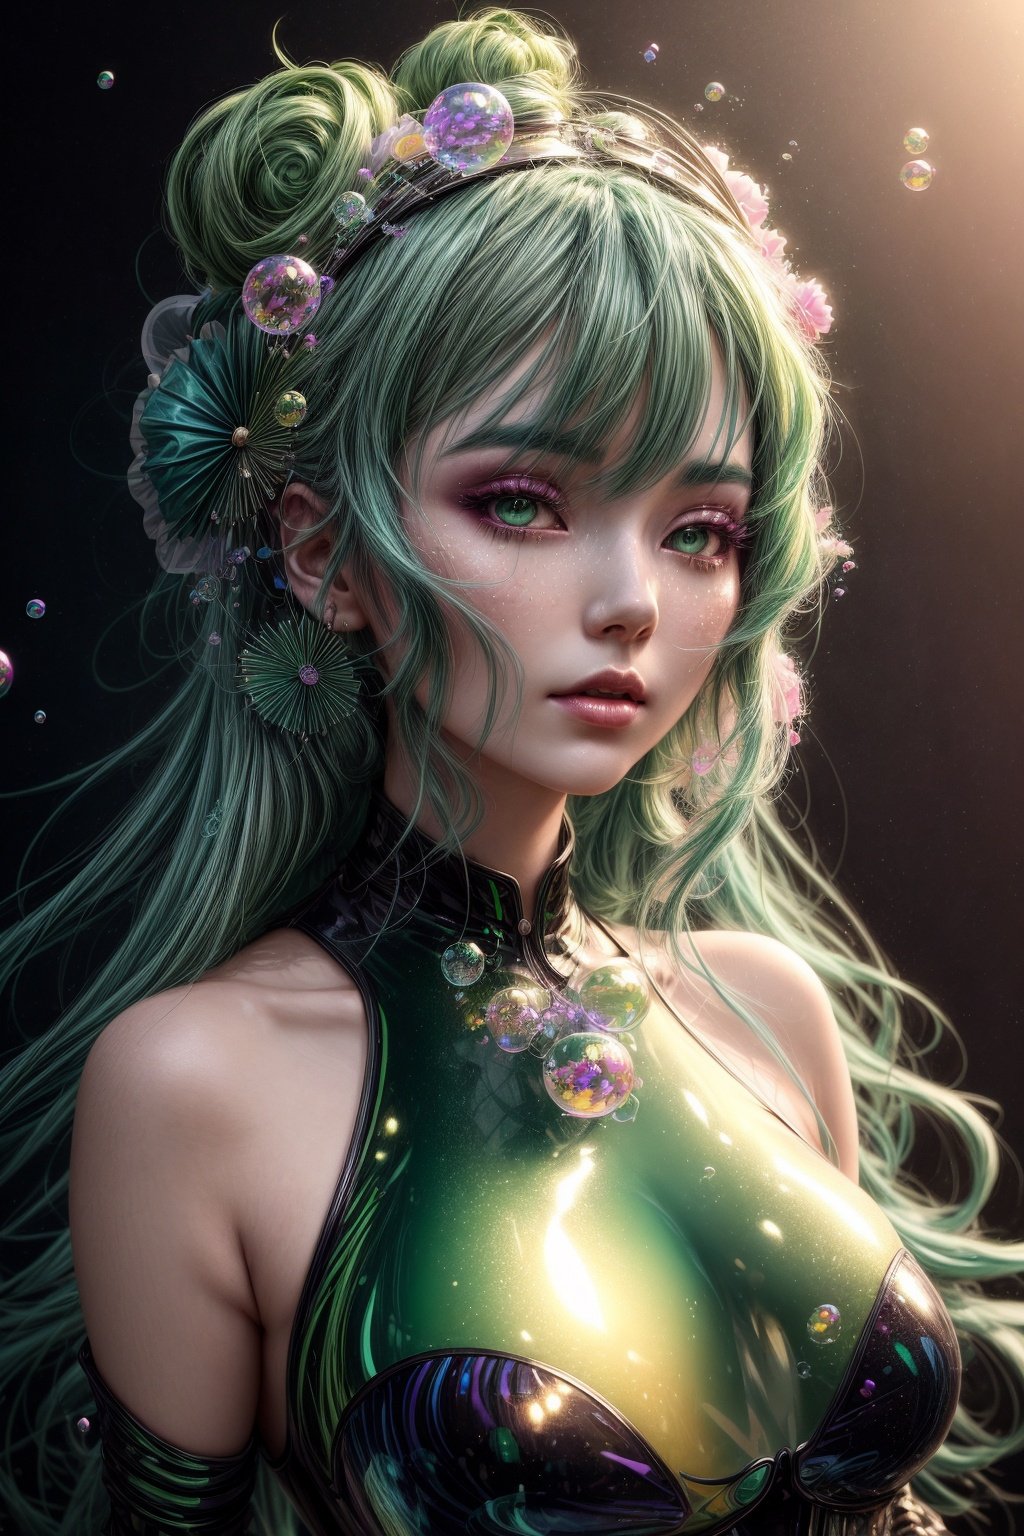 a woman with green hair is surrounded by bubbles, inspired by Yanjun Cheng, fantasy art, pop japonisme 3 d ultra detailed, fantasy victorian art, style hybrid mix of beeple, sakimichan frank franzzeta, underwater face, rossdraws 1. 0, stylized 3 d, beeple and jeremiah ketner